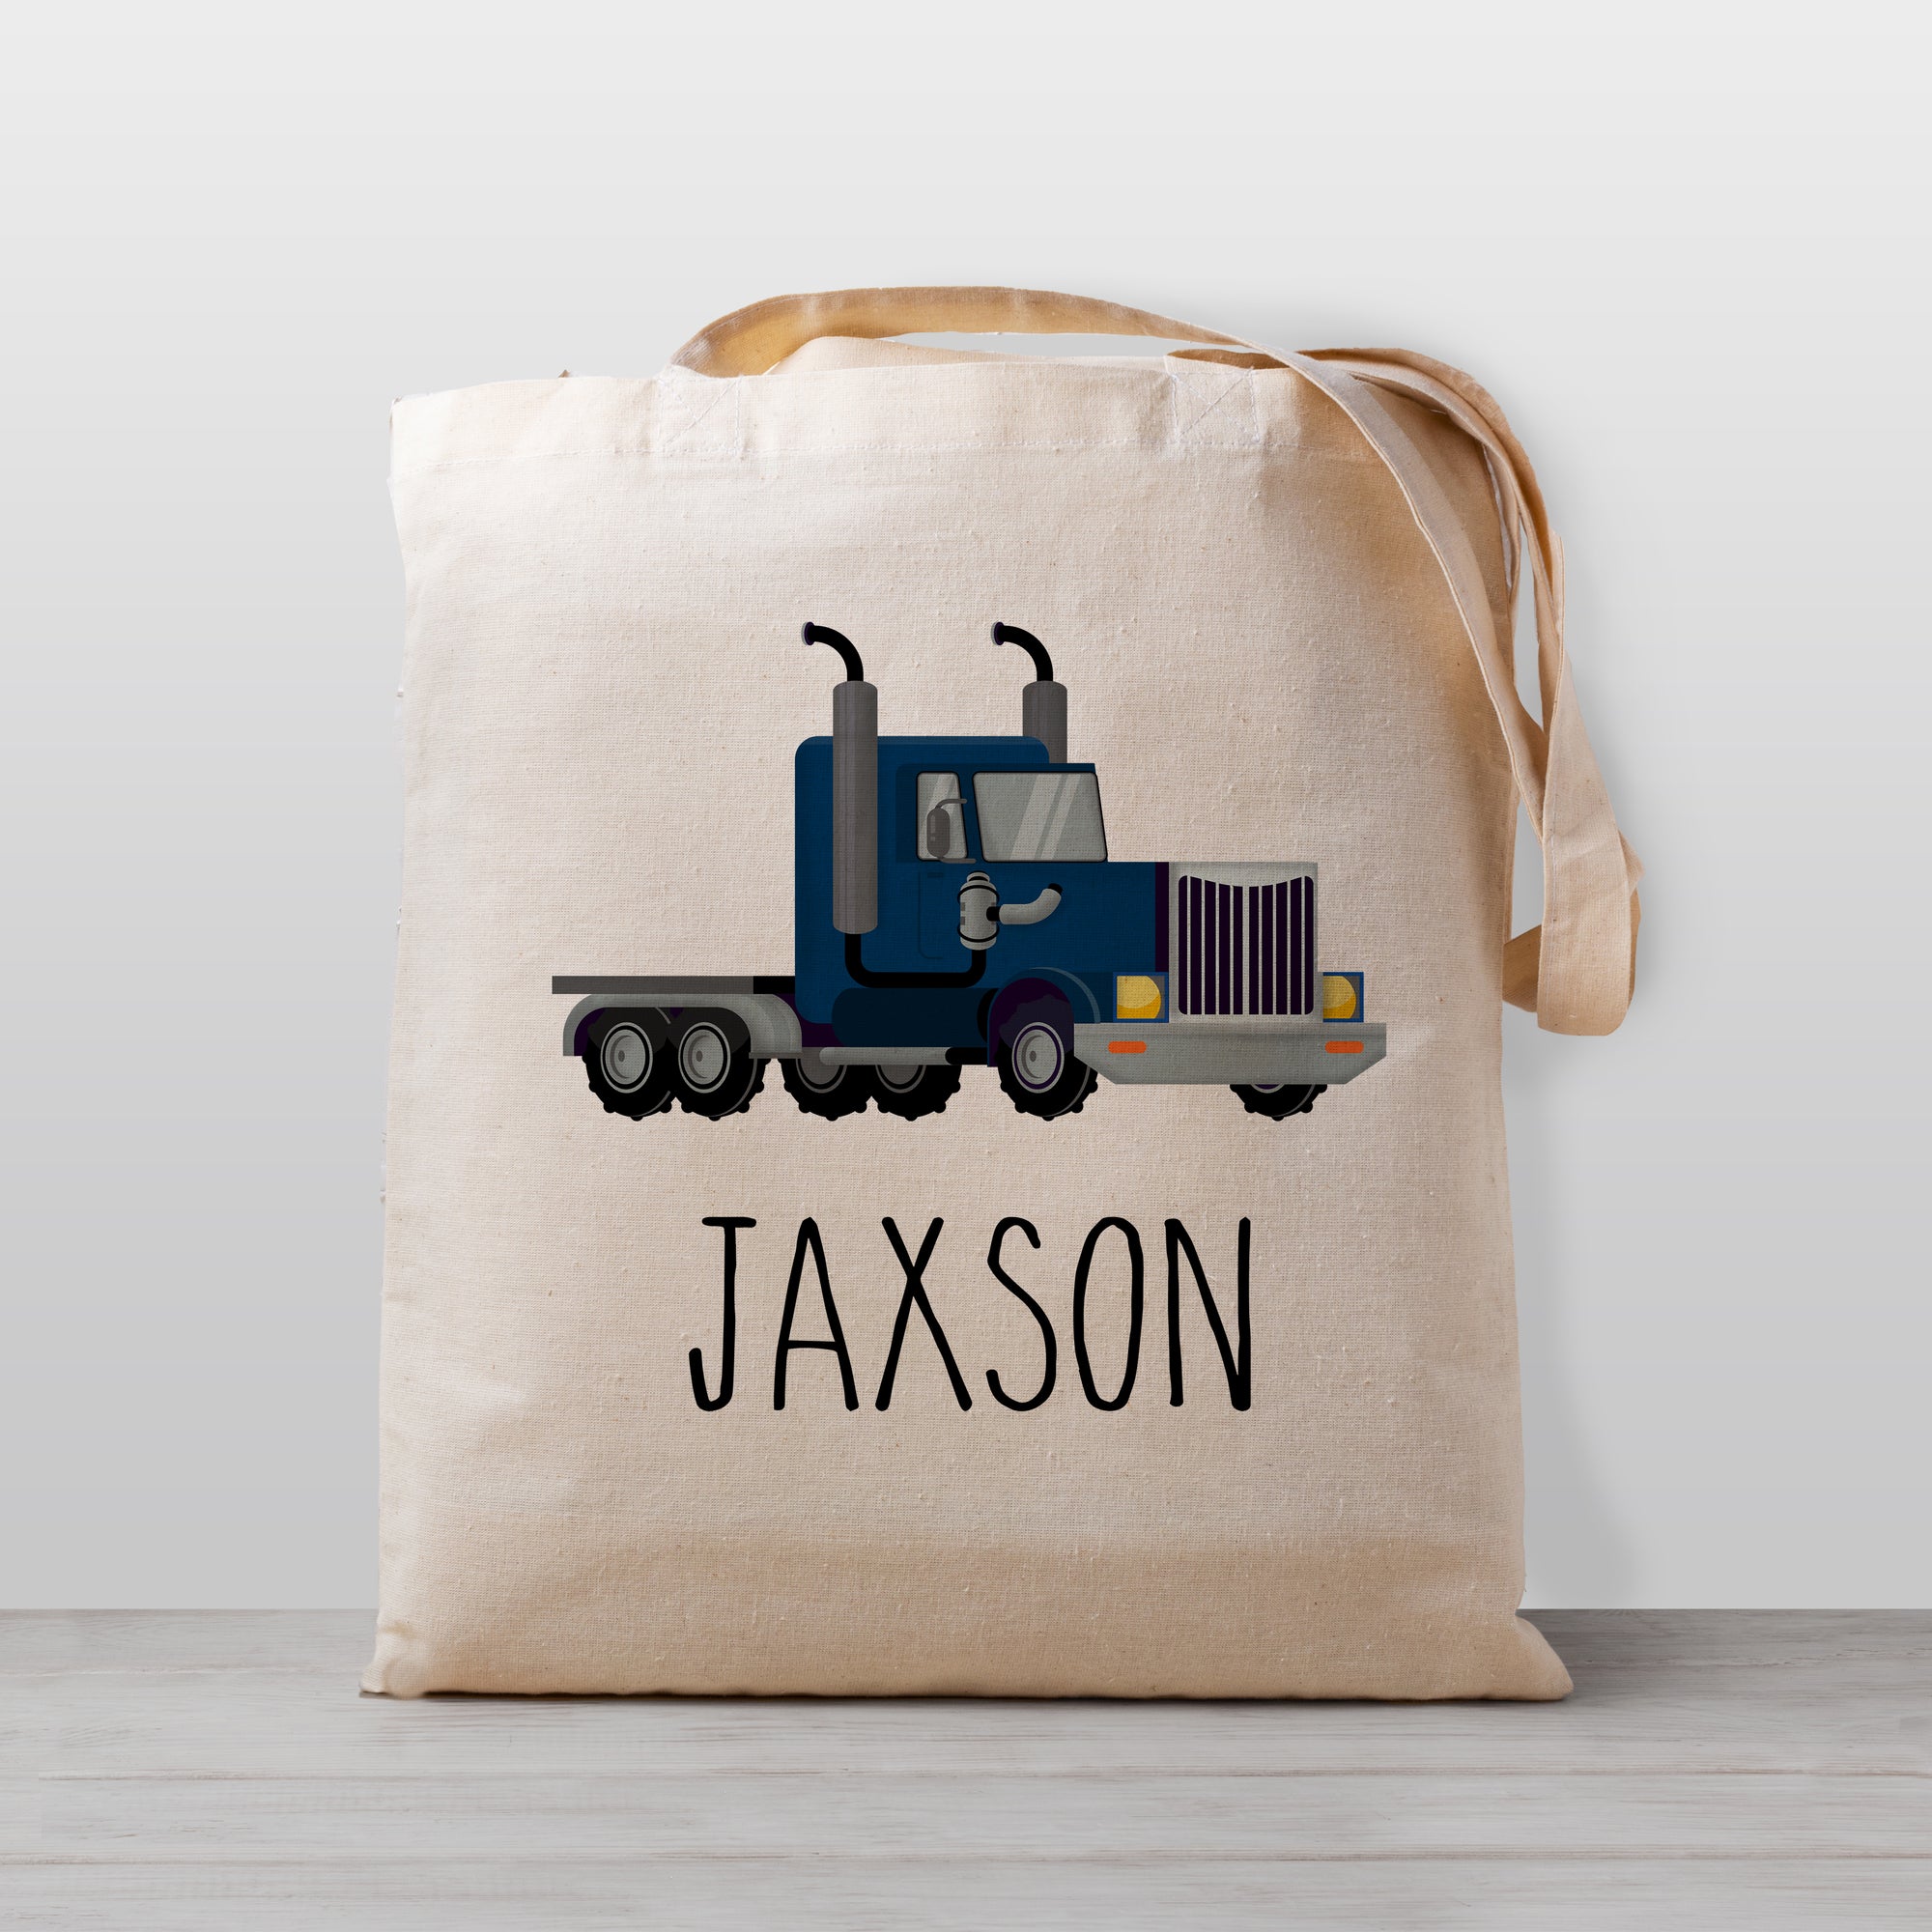 Semi-truck tote bag personalized with your child's name, made of 100% natural cotton canvas, perfect for daycare or preschool